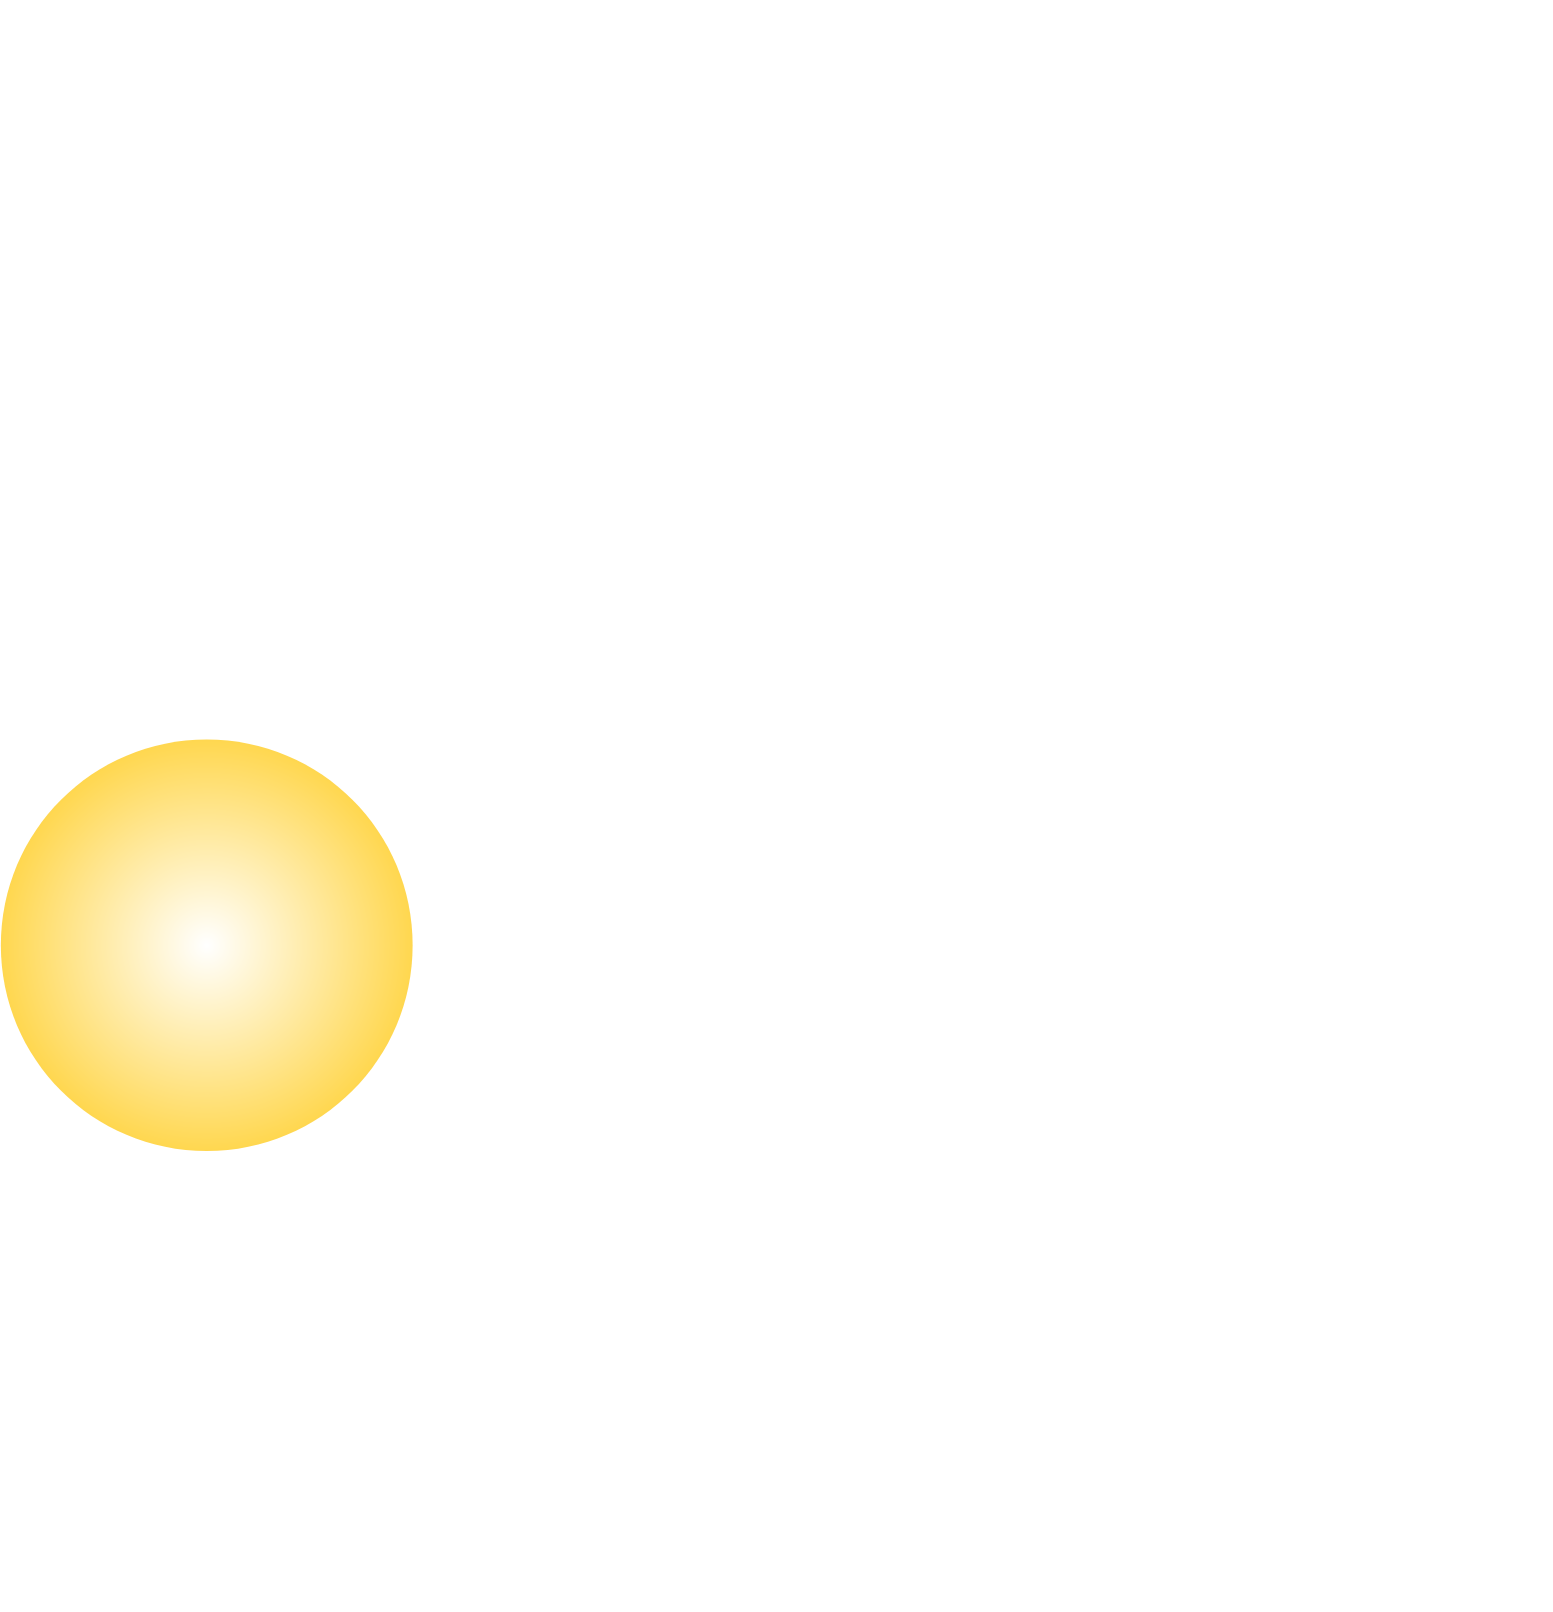 Cryo-Cell logo for dark backgrounds (transparent PNG)